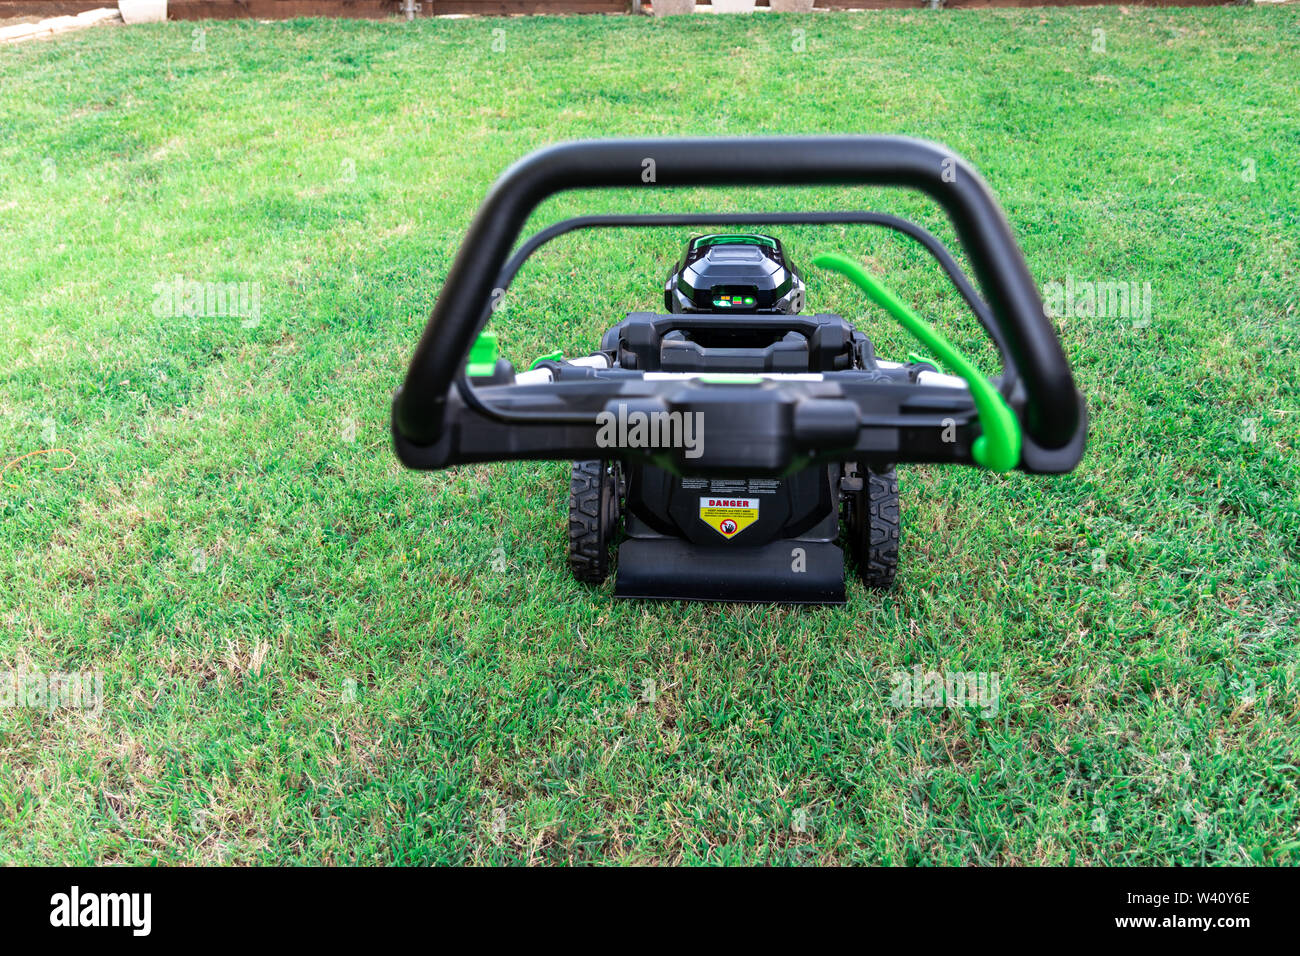 Battery powered 56 volt electric lawnmower for eco lawn care Stock Photo